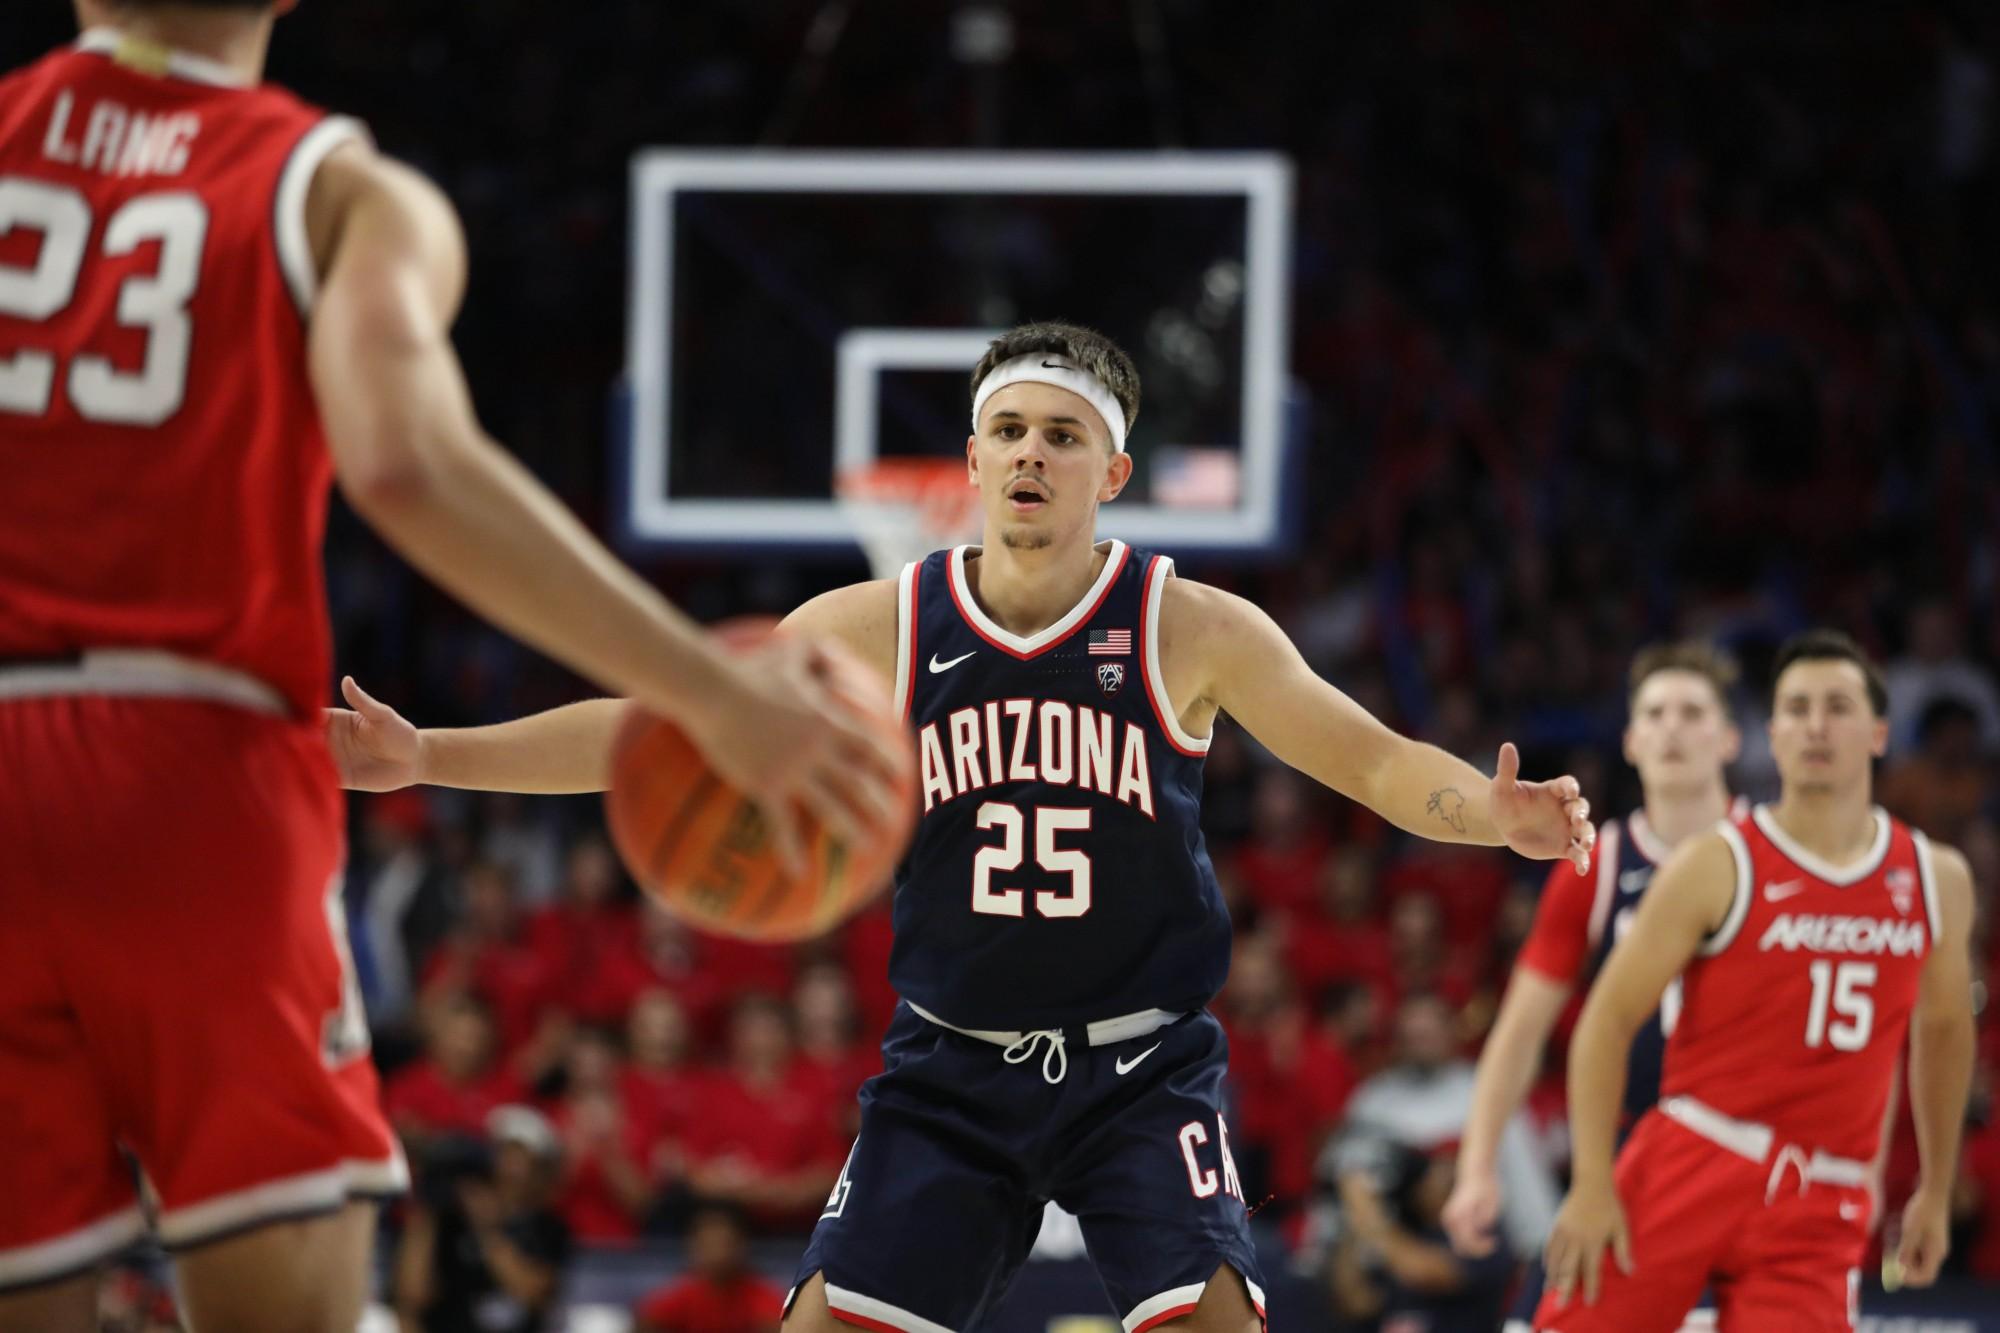 Arizona men's basketball team player Kerr Kriisa (25) plays defense on Sept. 30 in McKale Center. The Blue team would win 49-45 over the Red team.